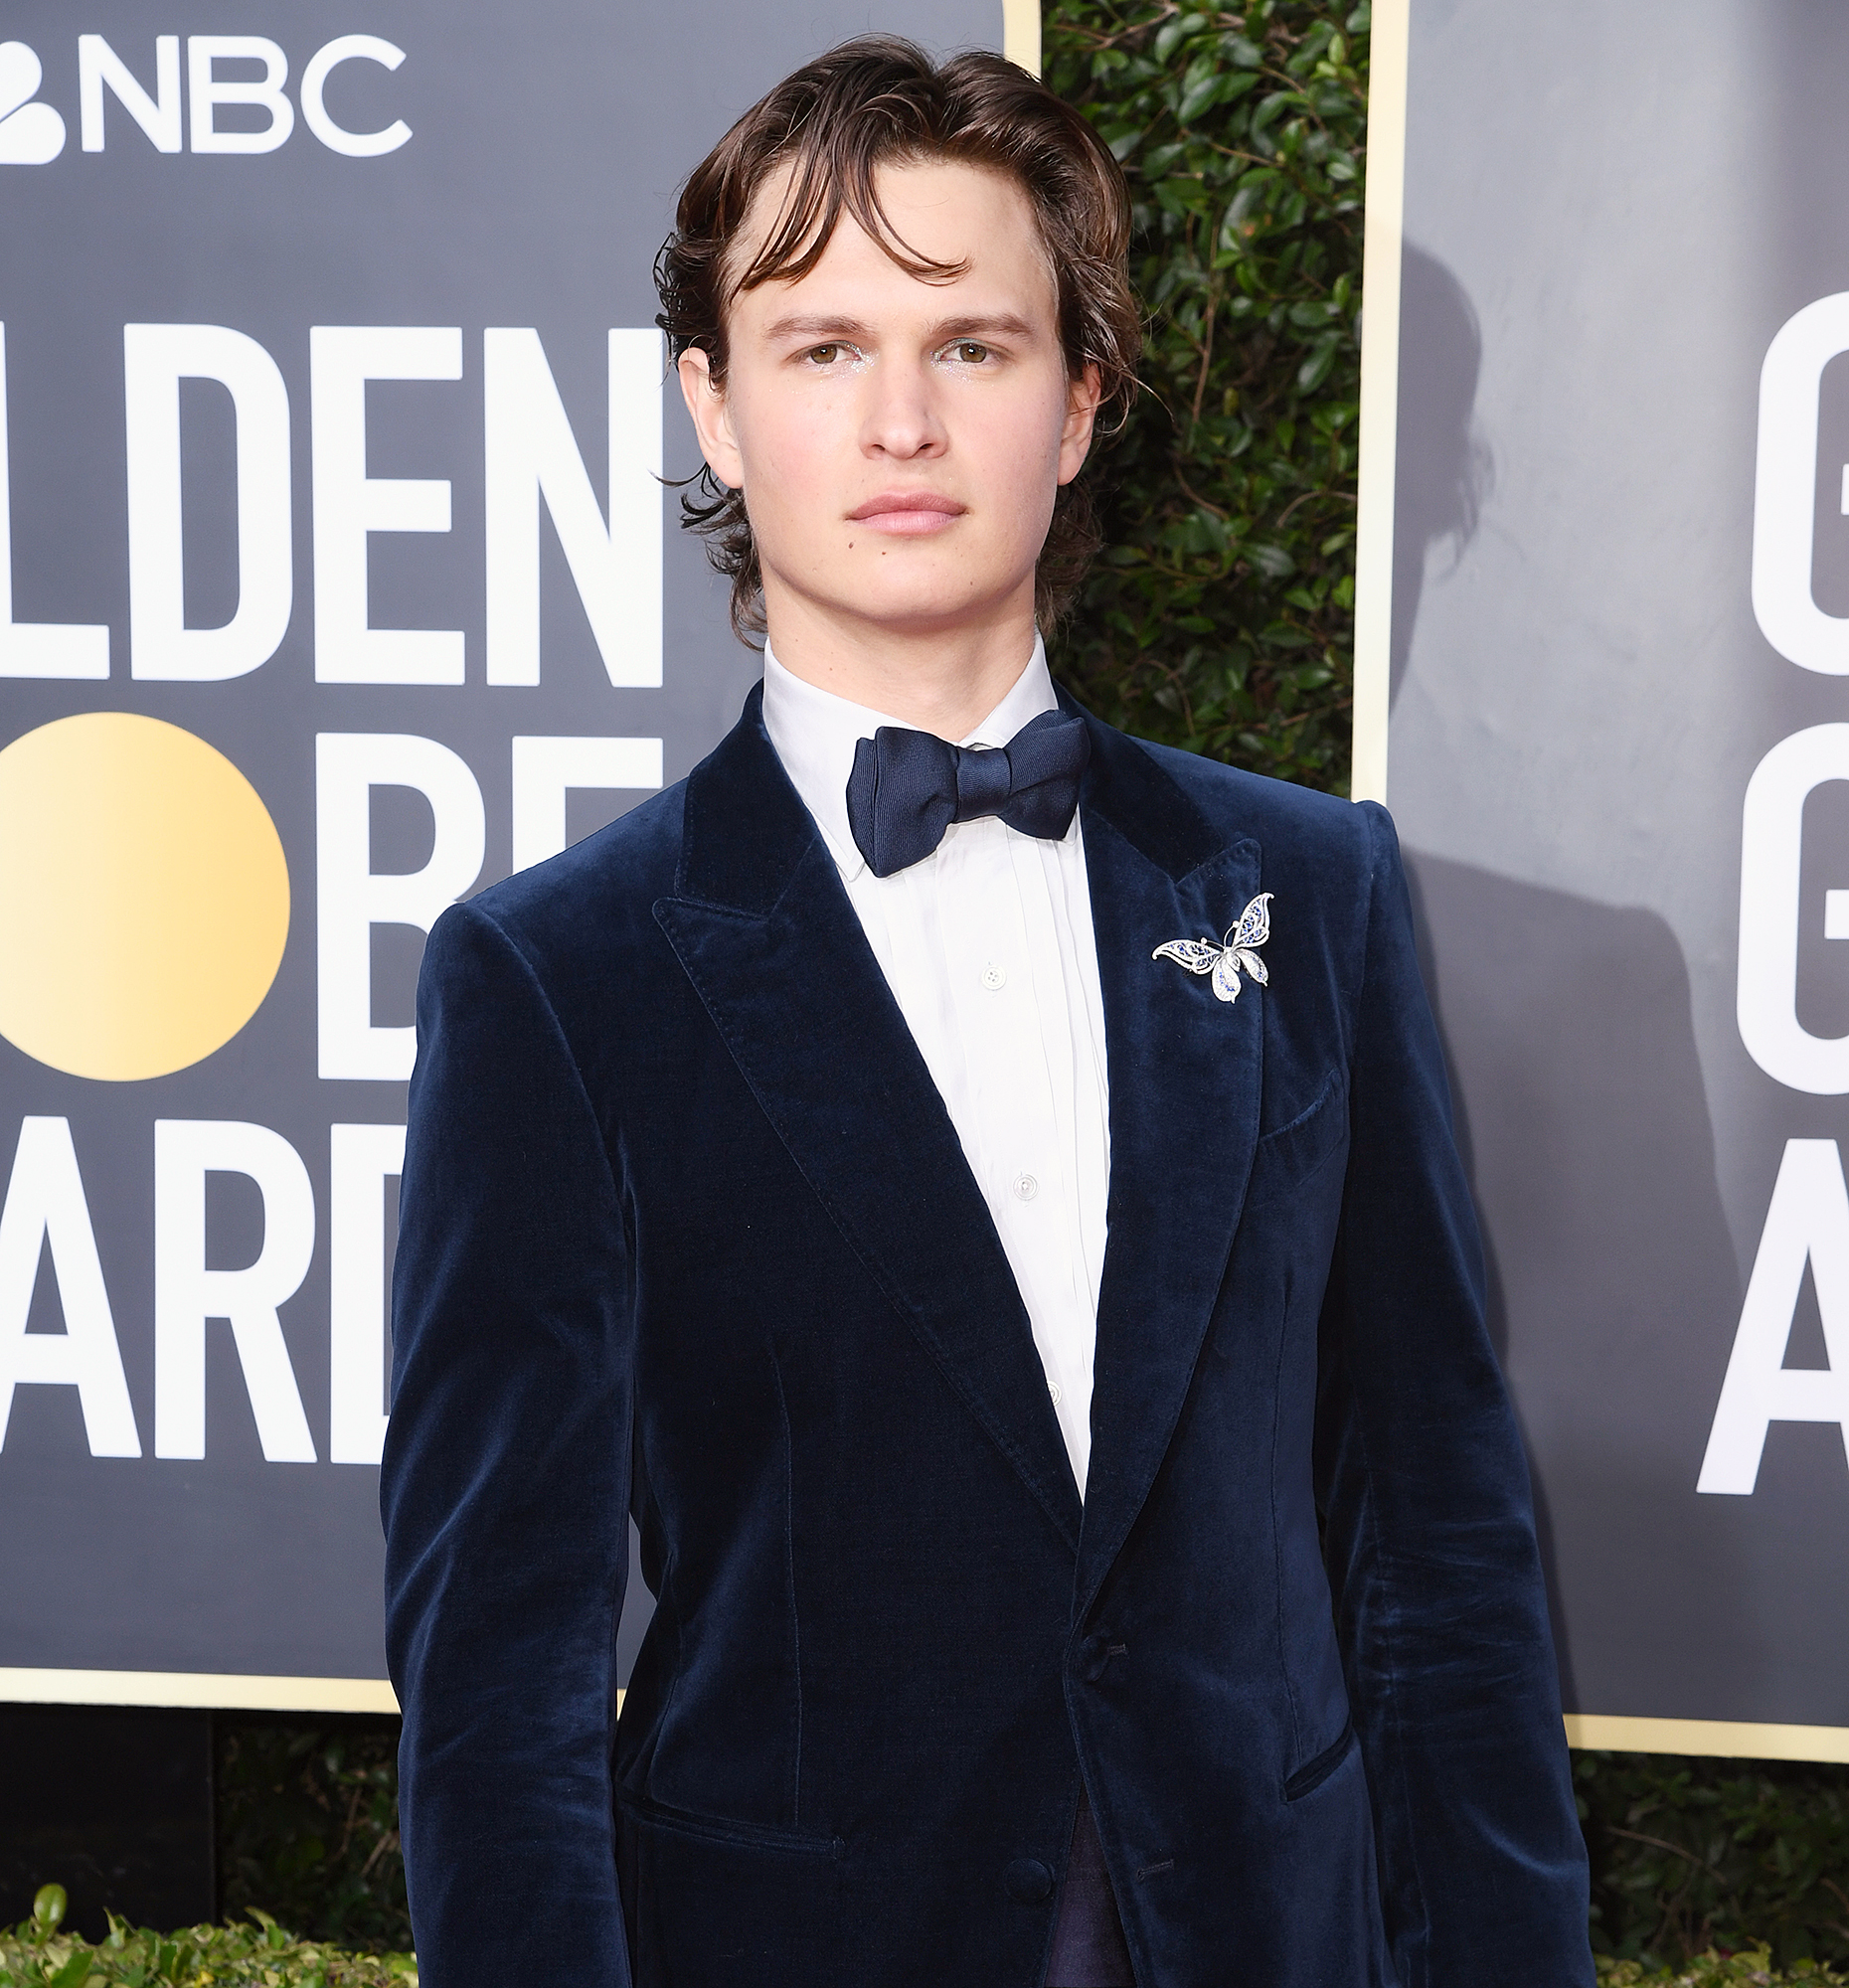 Ansel Elgort Speaks Out Amid Accusations of Sexual Assault